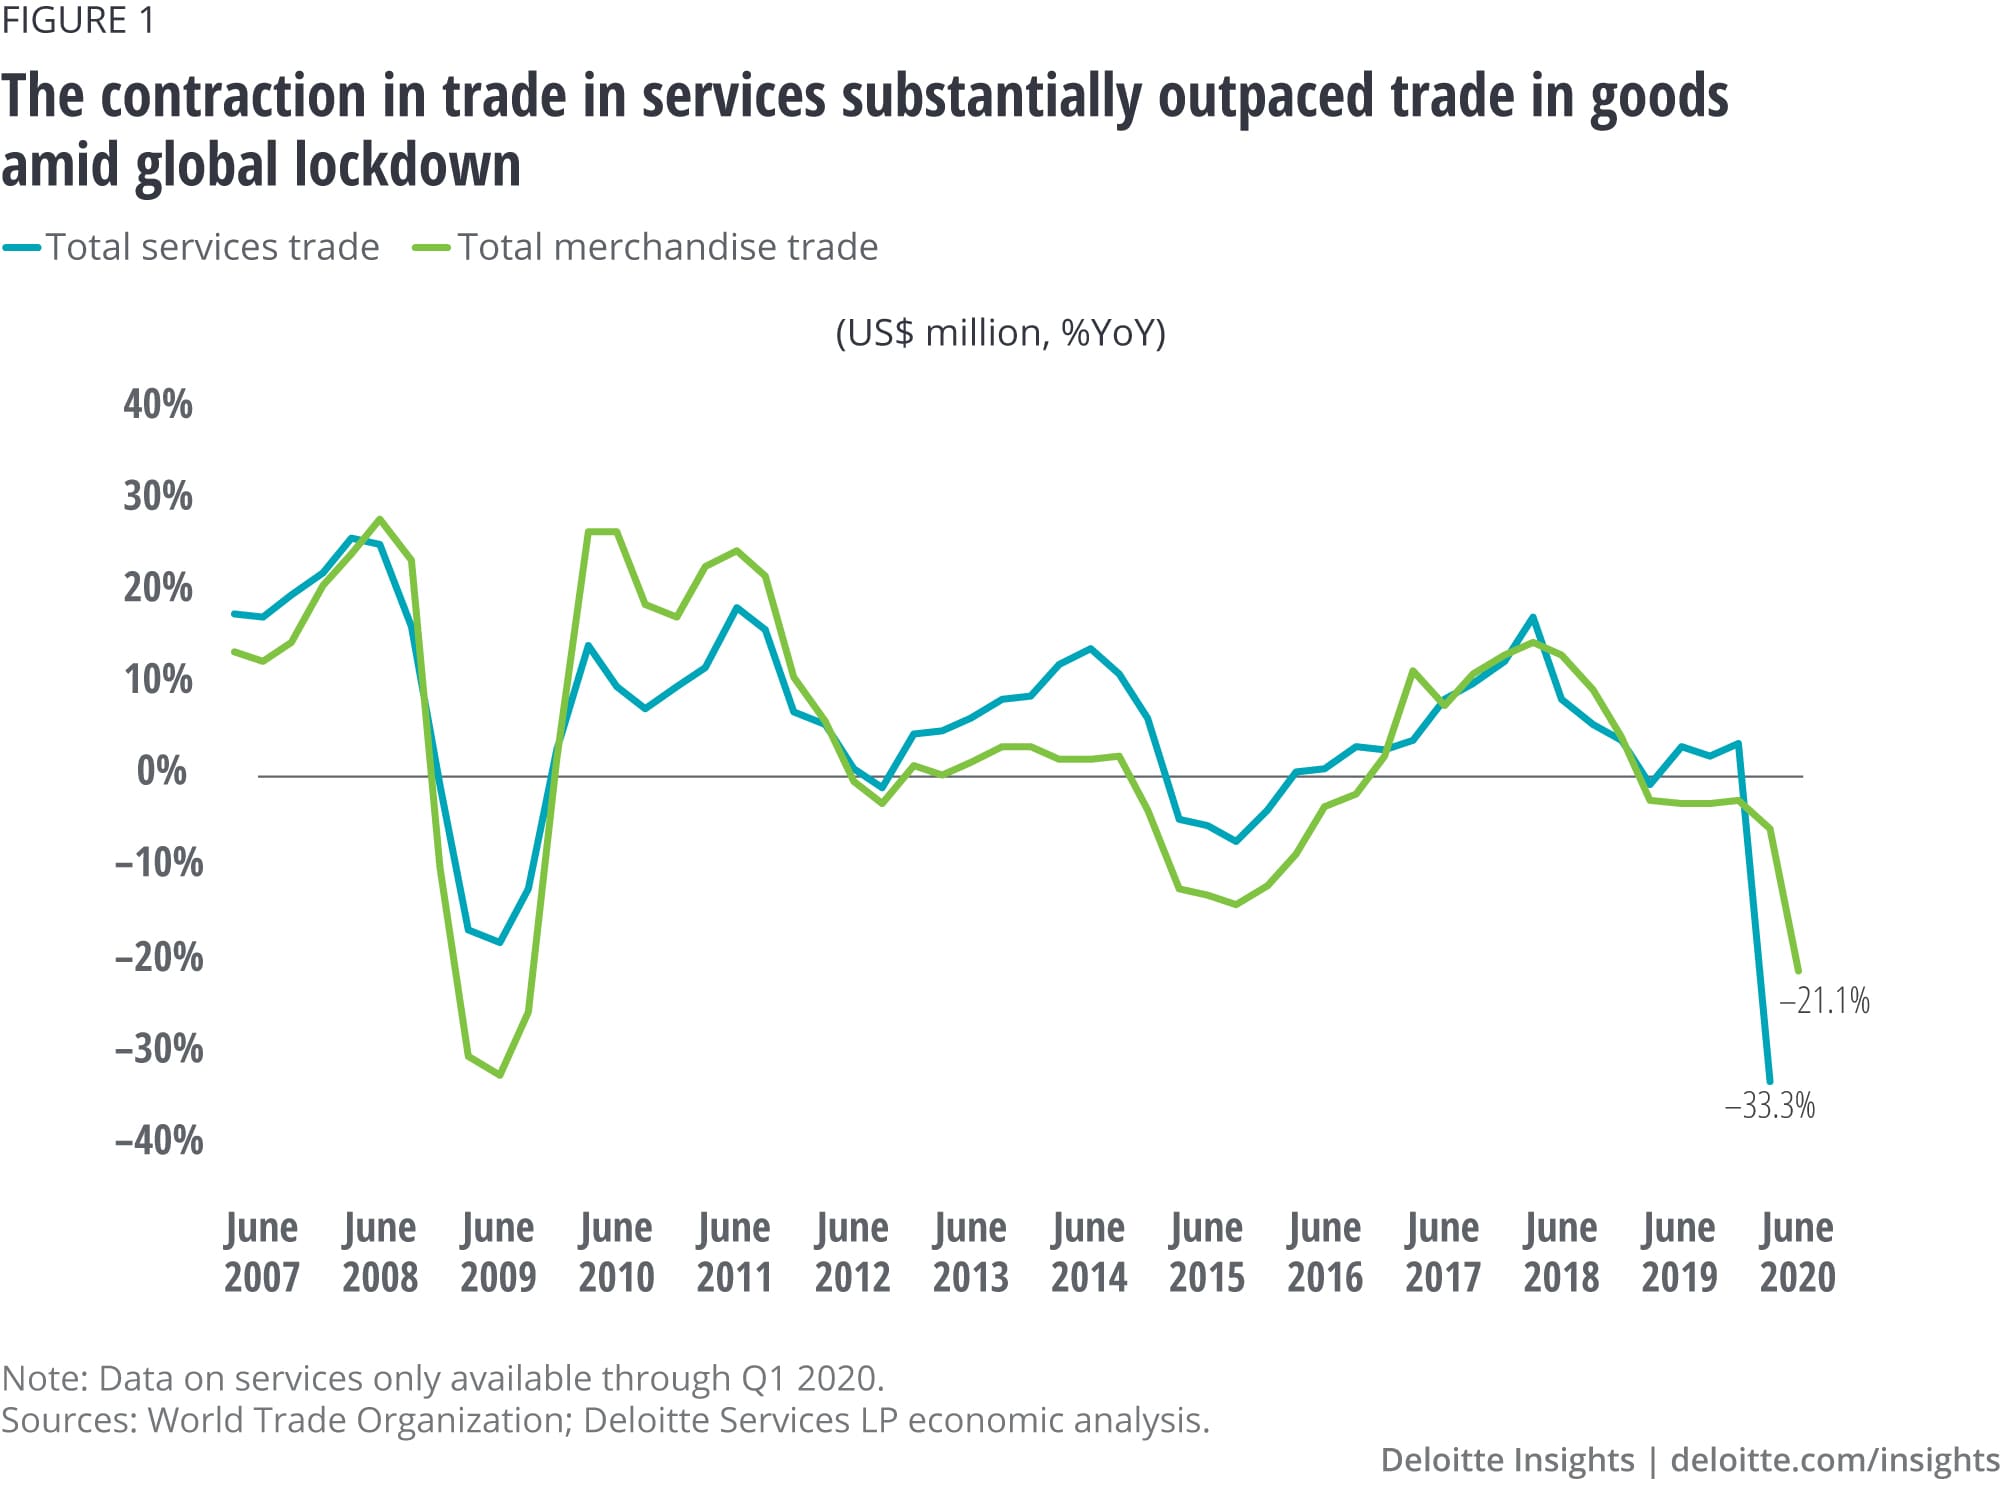 The contraction in trade in services substantially outpaced trade in goods amid global lockdown